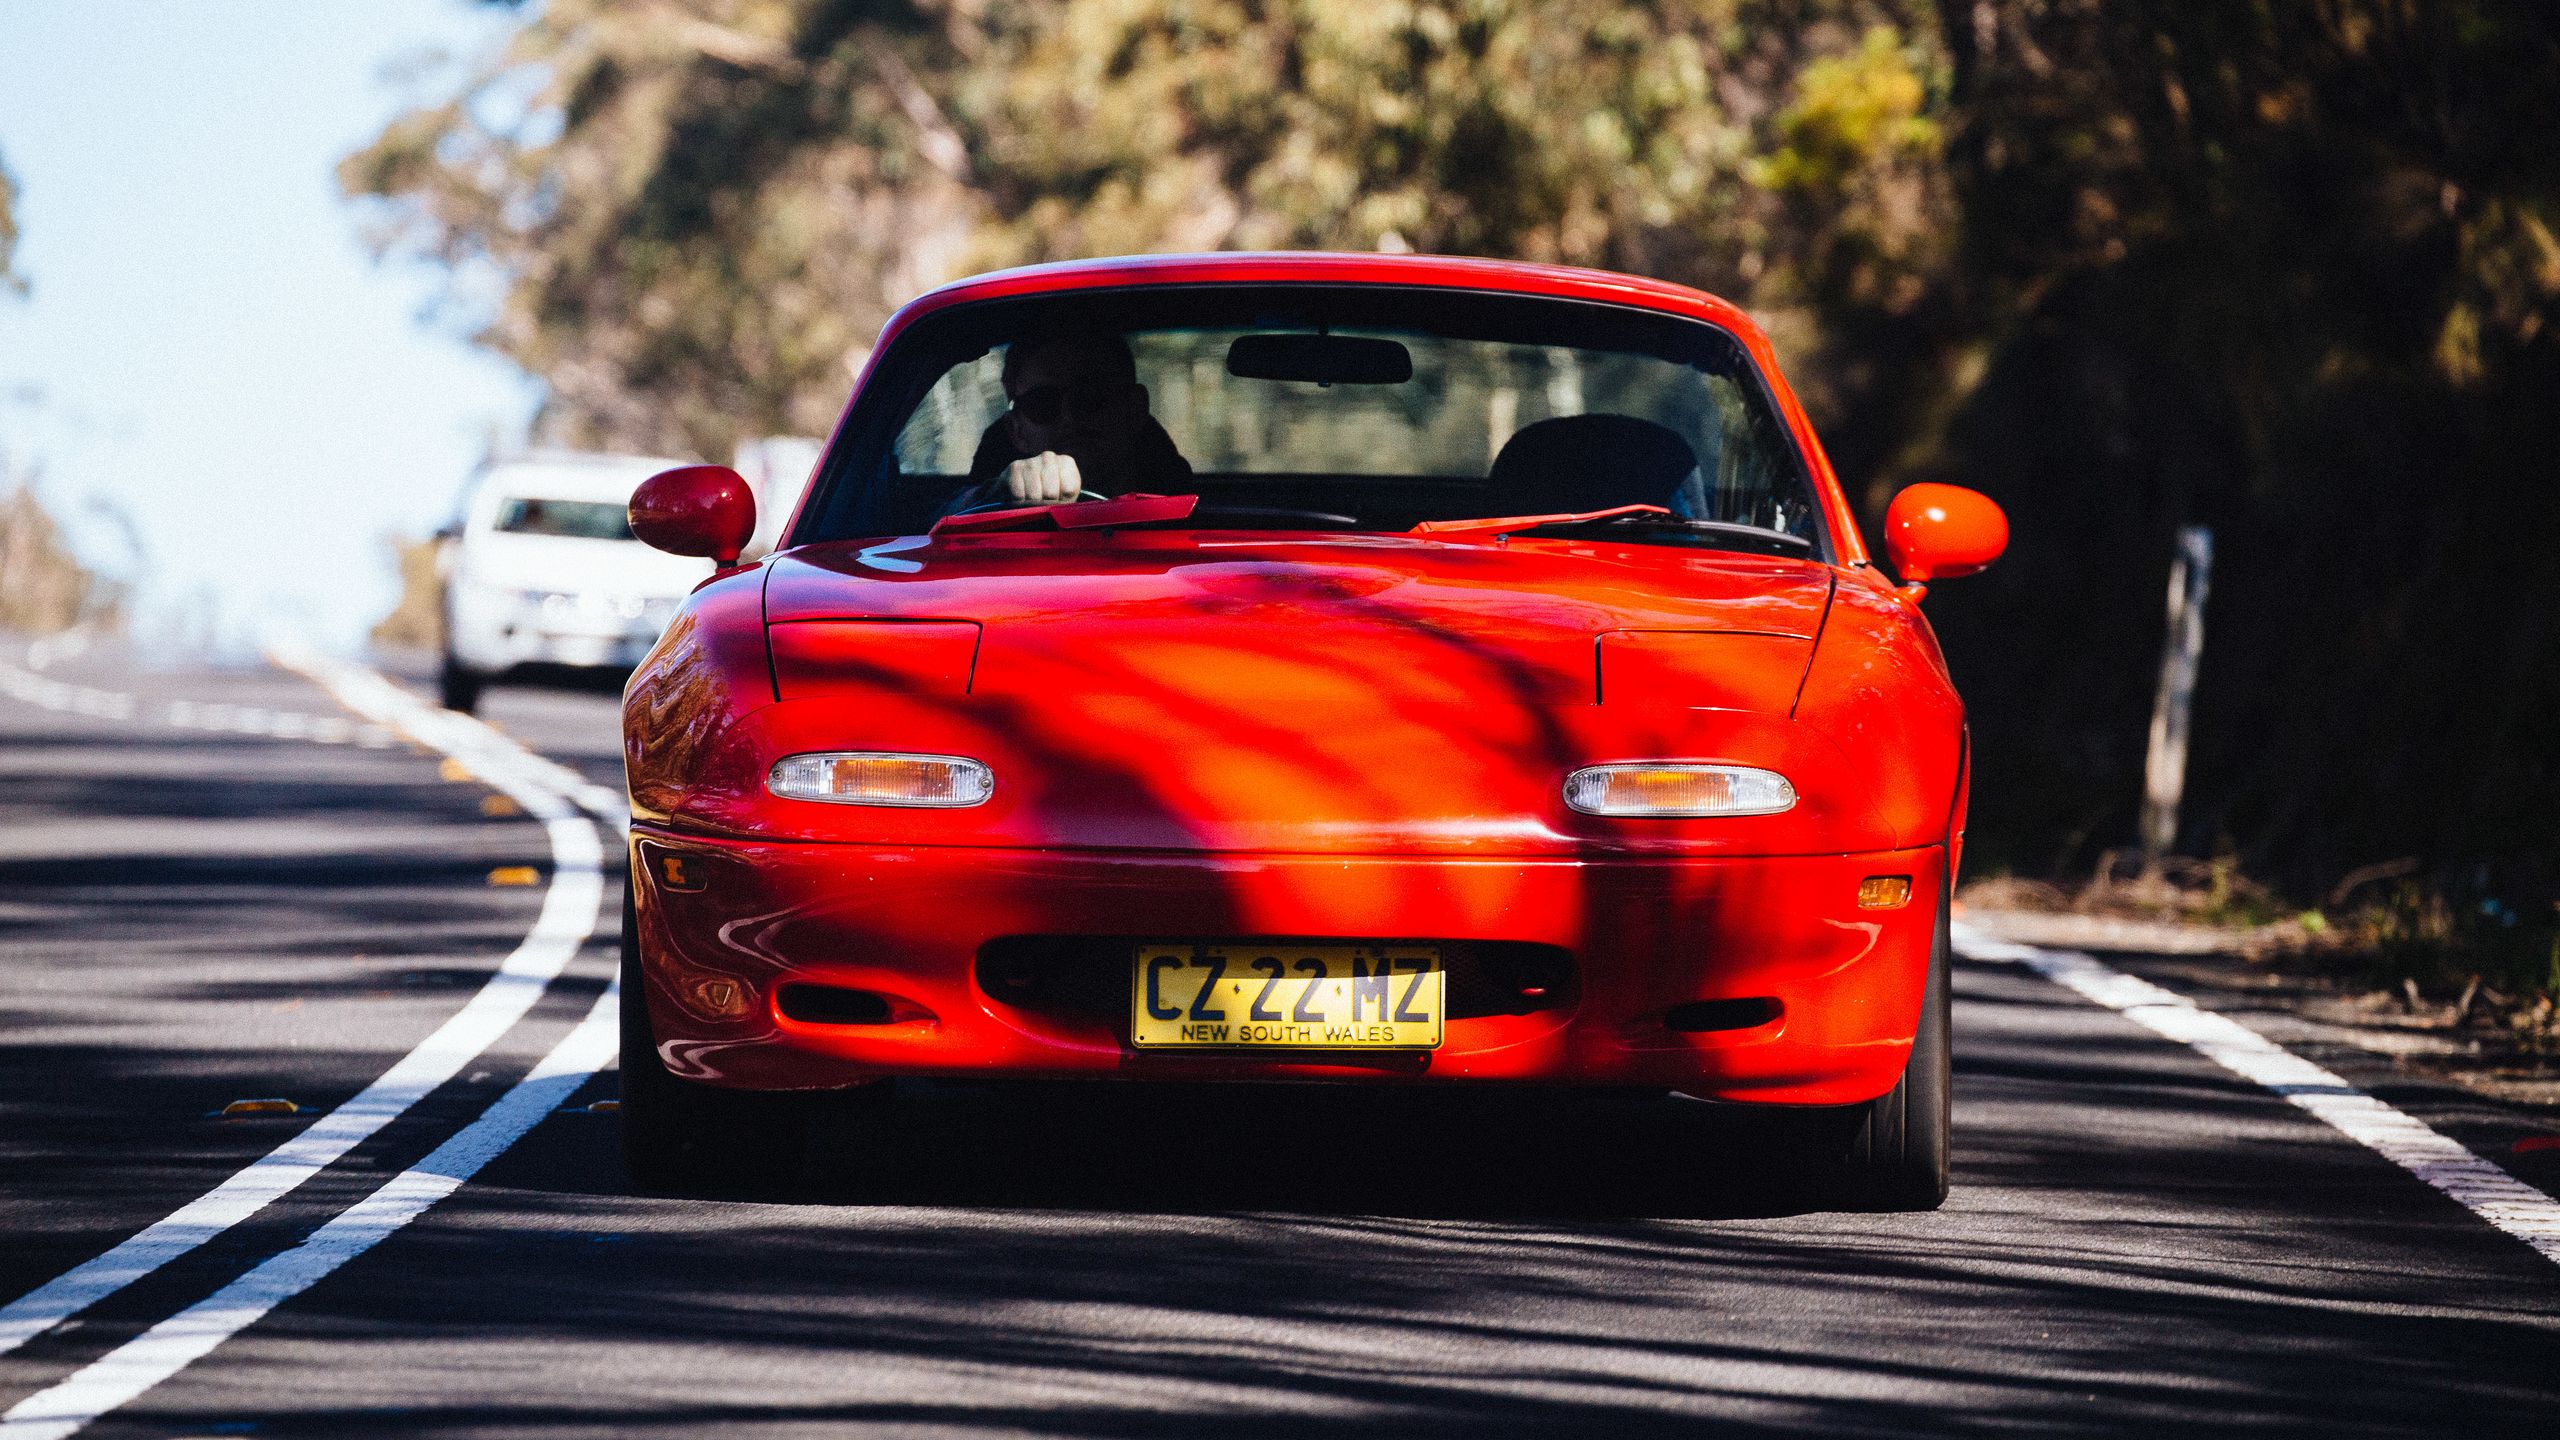 Download wallpaper 2560x1440 mazda rx-7, mazda, car, red, front view ...